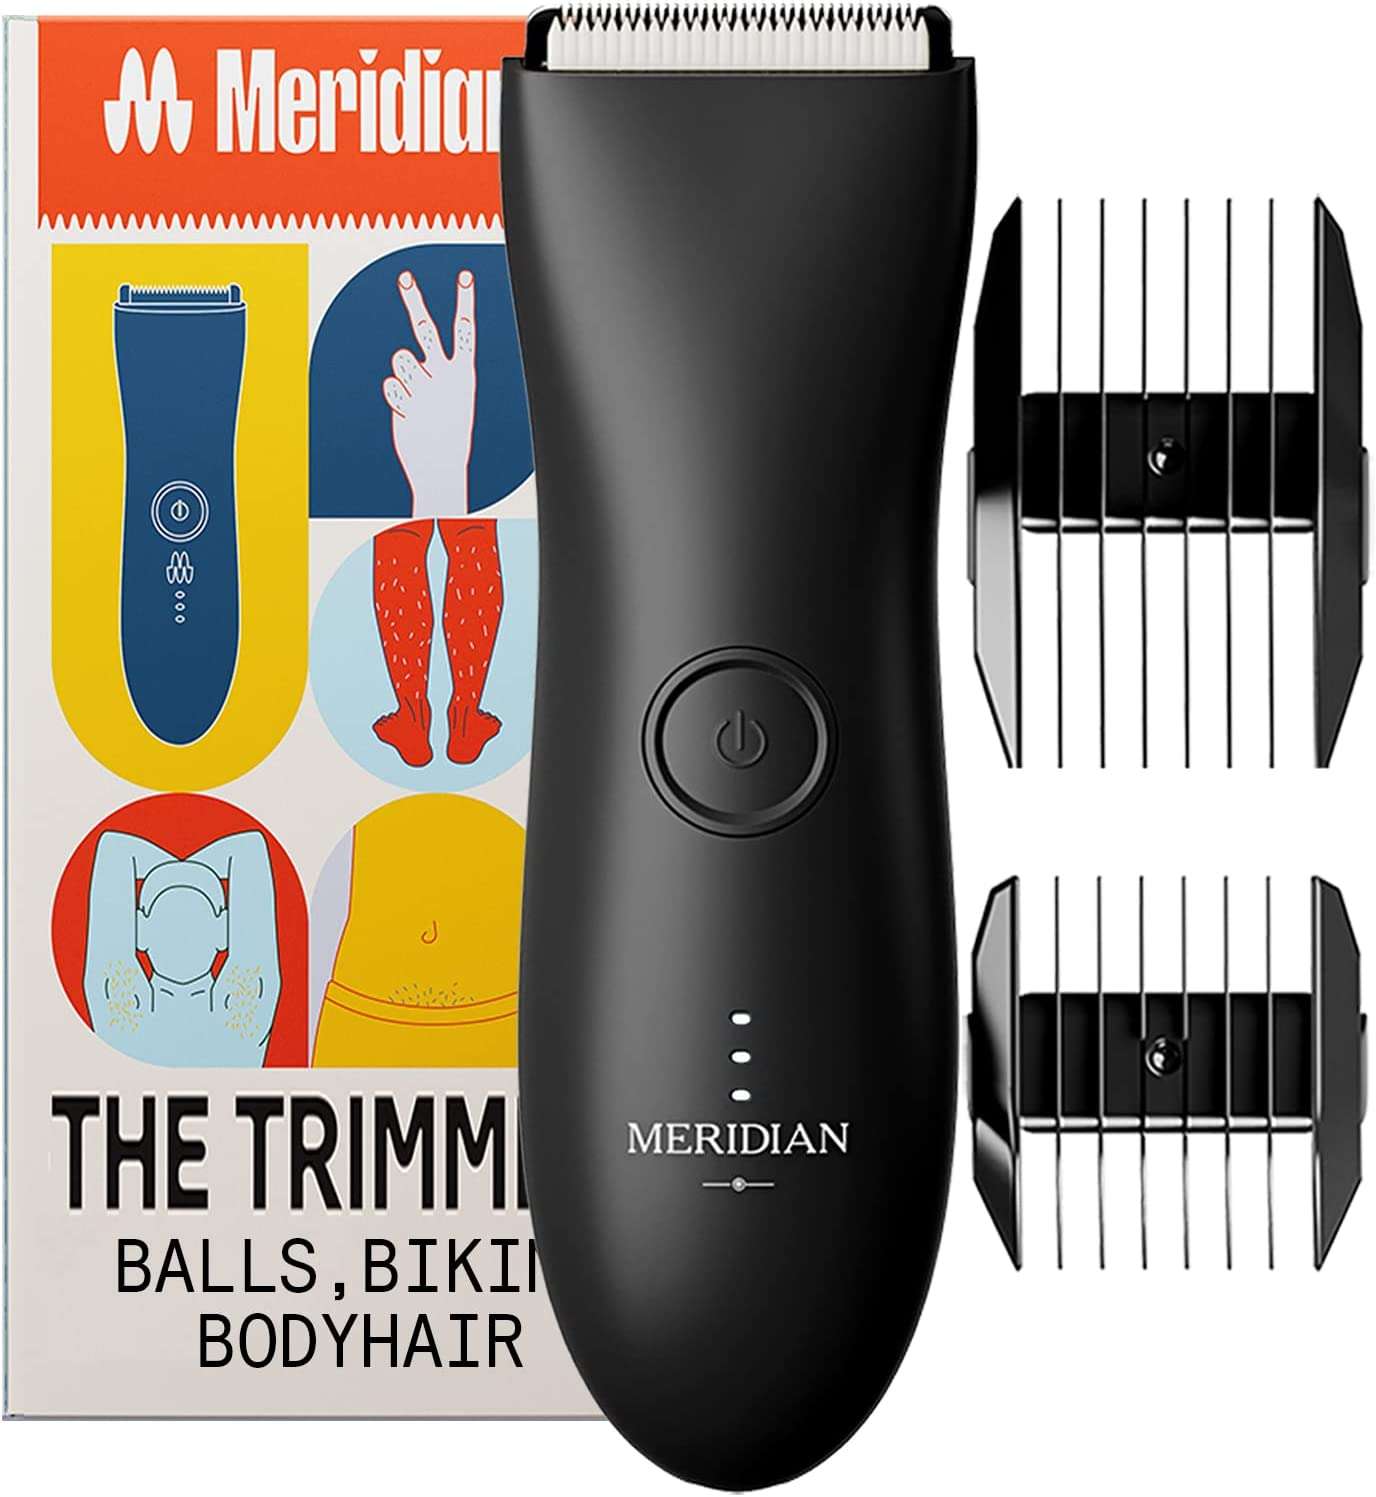 Personal Hair Trimmer and Groomer for Men and Women, Meridian Waterproof Trimmer, Ergonomic Design